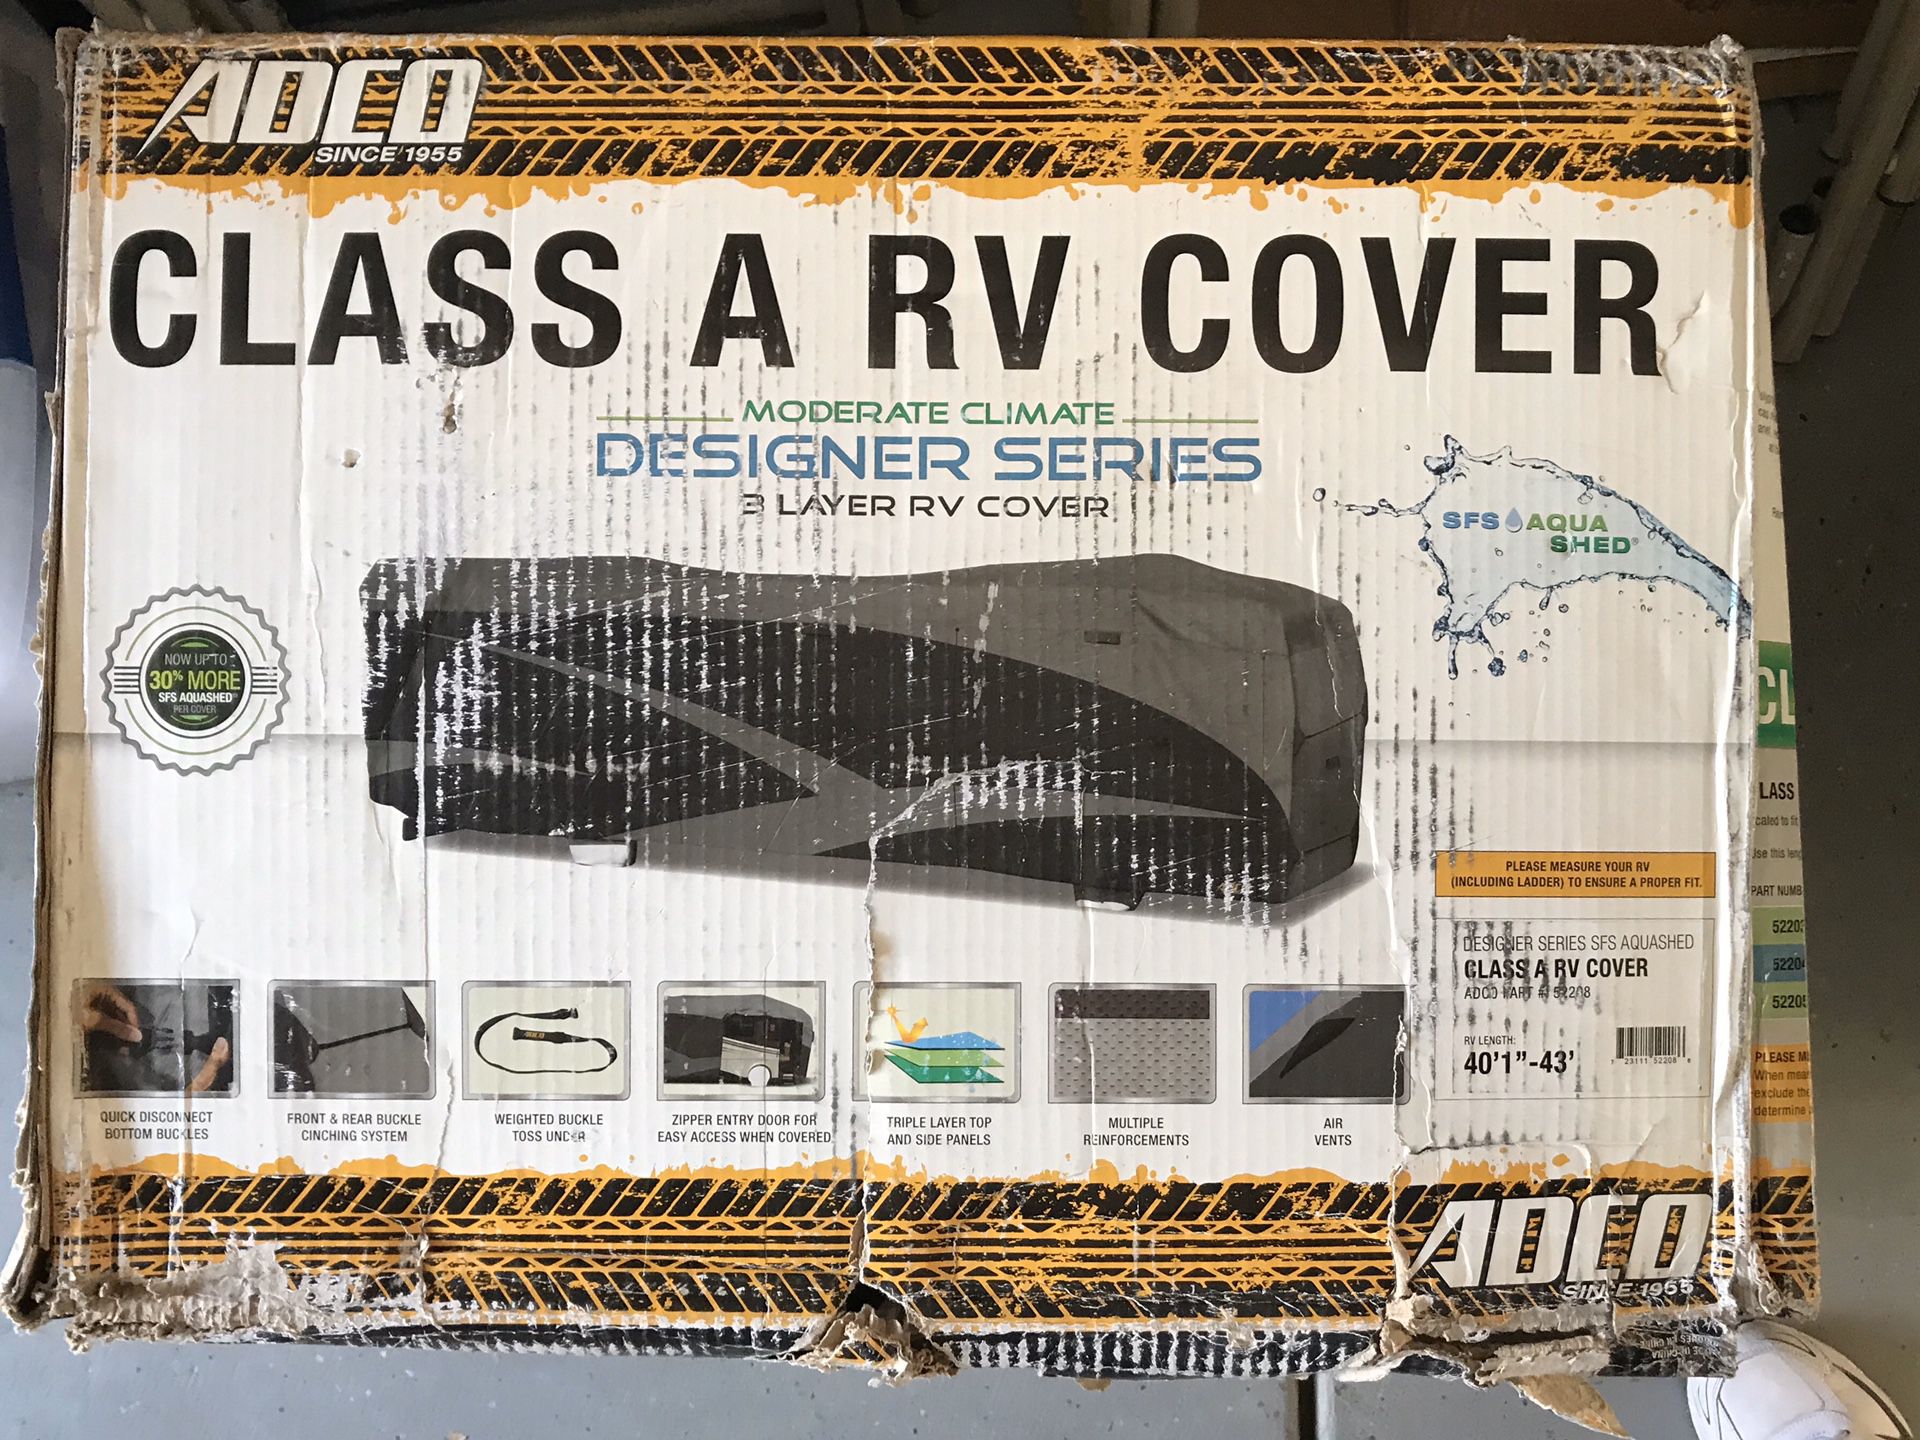 Class A RV cover for 40-1”-43” in length never been used and RV tire covers